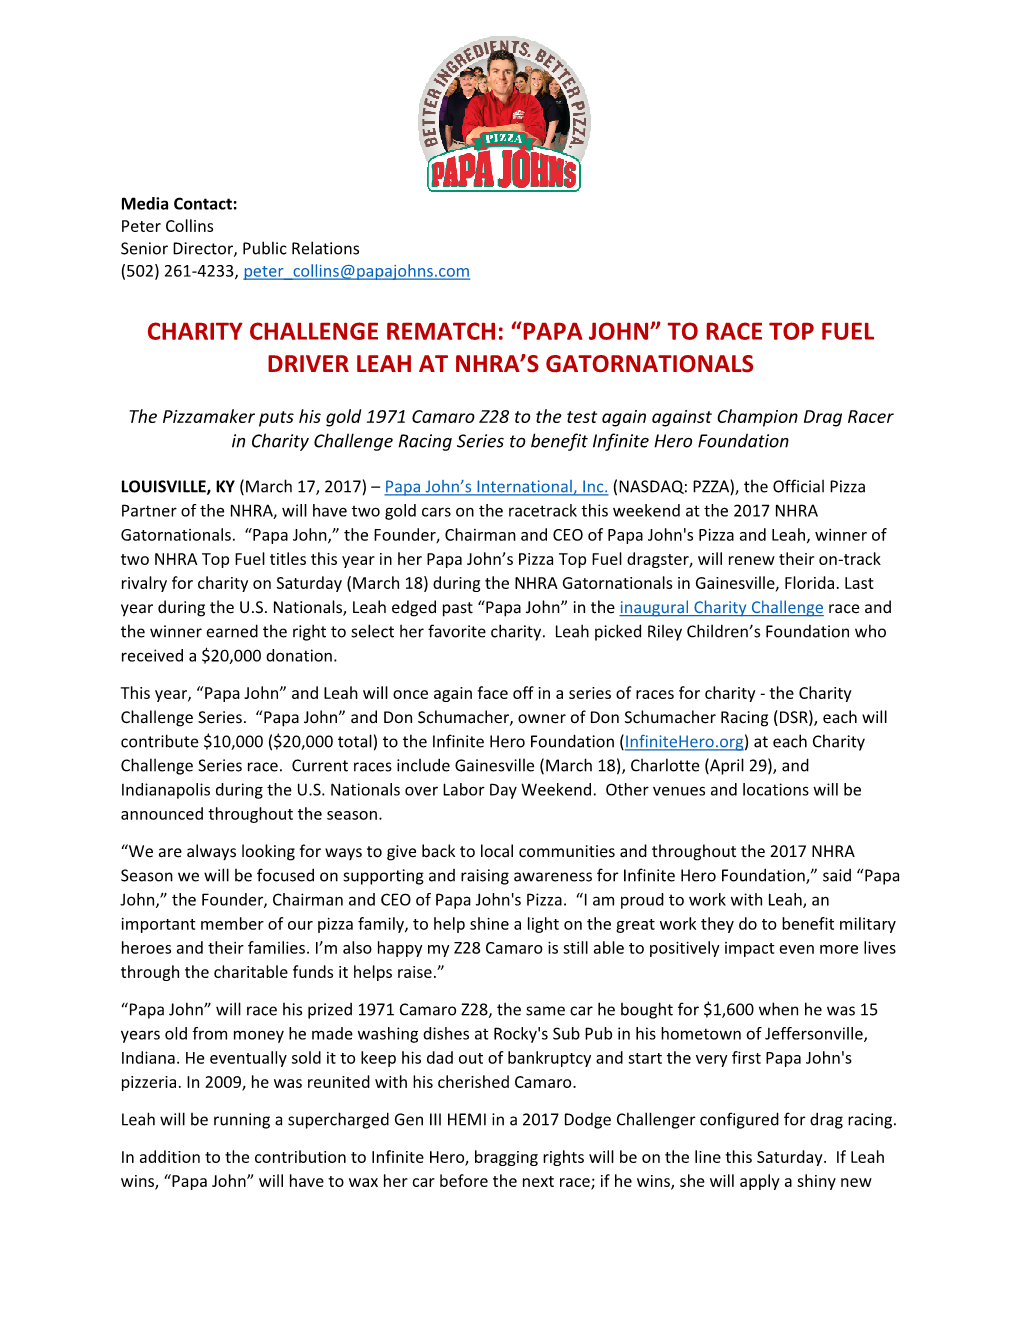 Charity Challenge Gainesville Press Release 3 17 17 FINAL